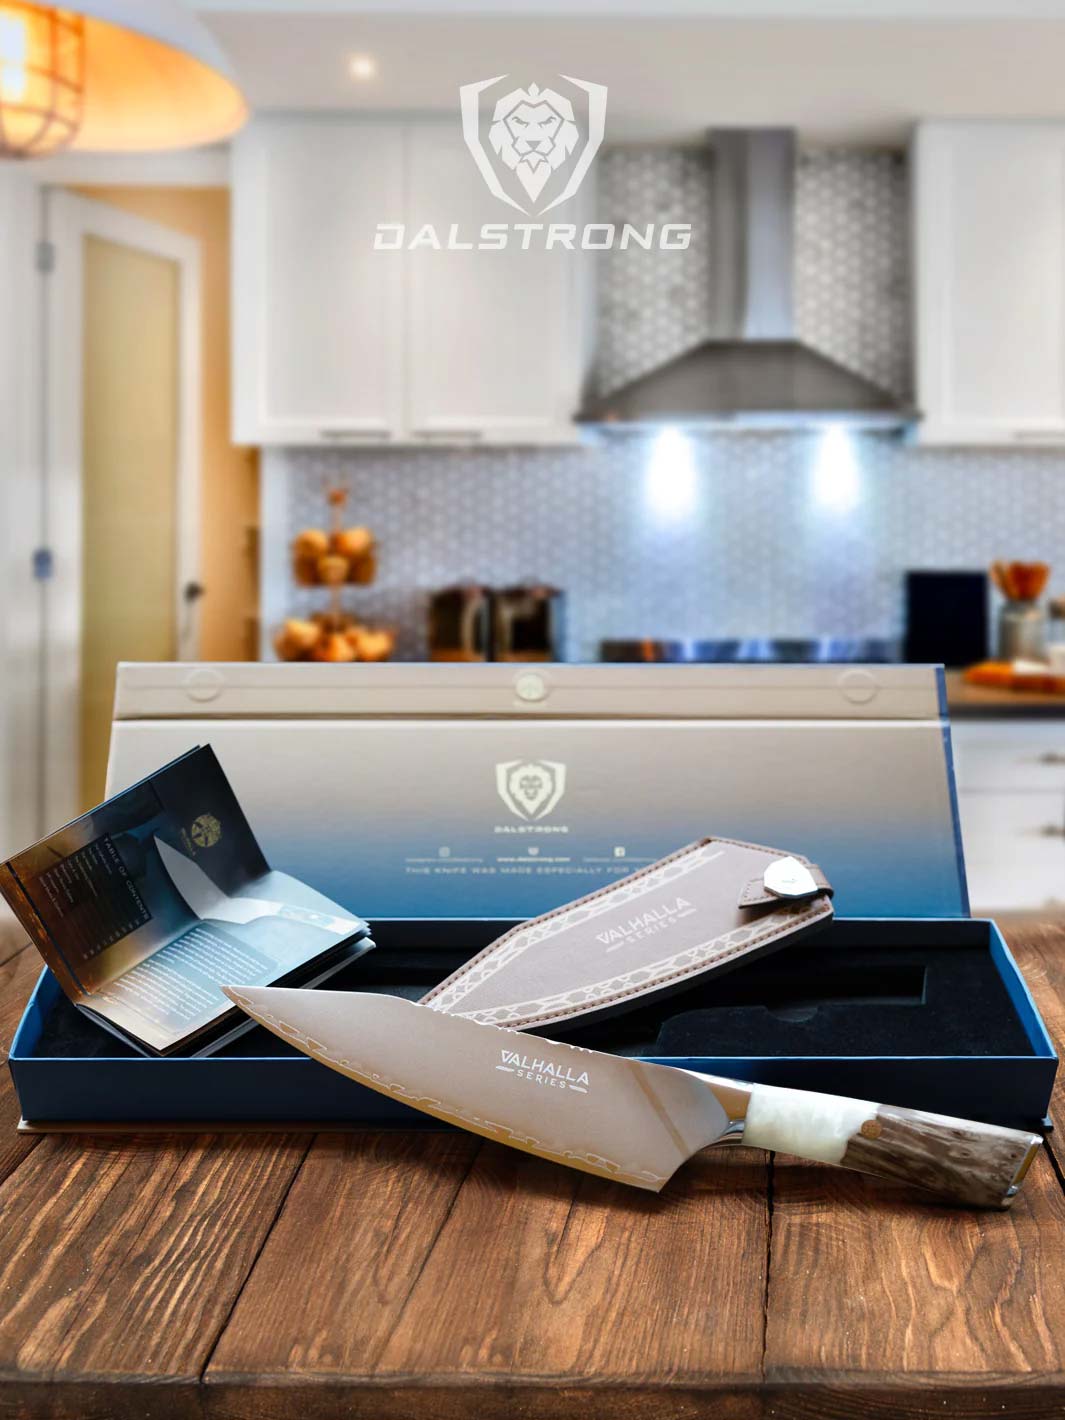 Dalstrong Chef Knife - 8 inch - Valhalla Series - 9CR18MOV HC Steel Kitchen Knife - White Resin & Wood Handle - Razor Sharp Chef's Knife - Kitchen